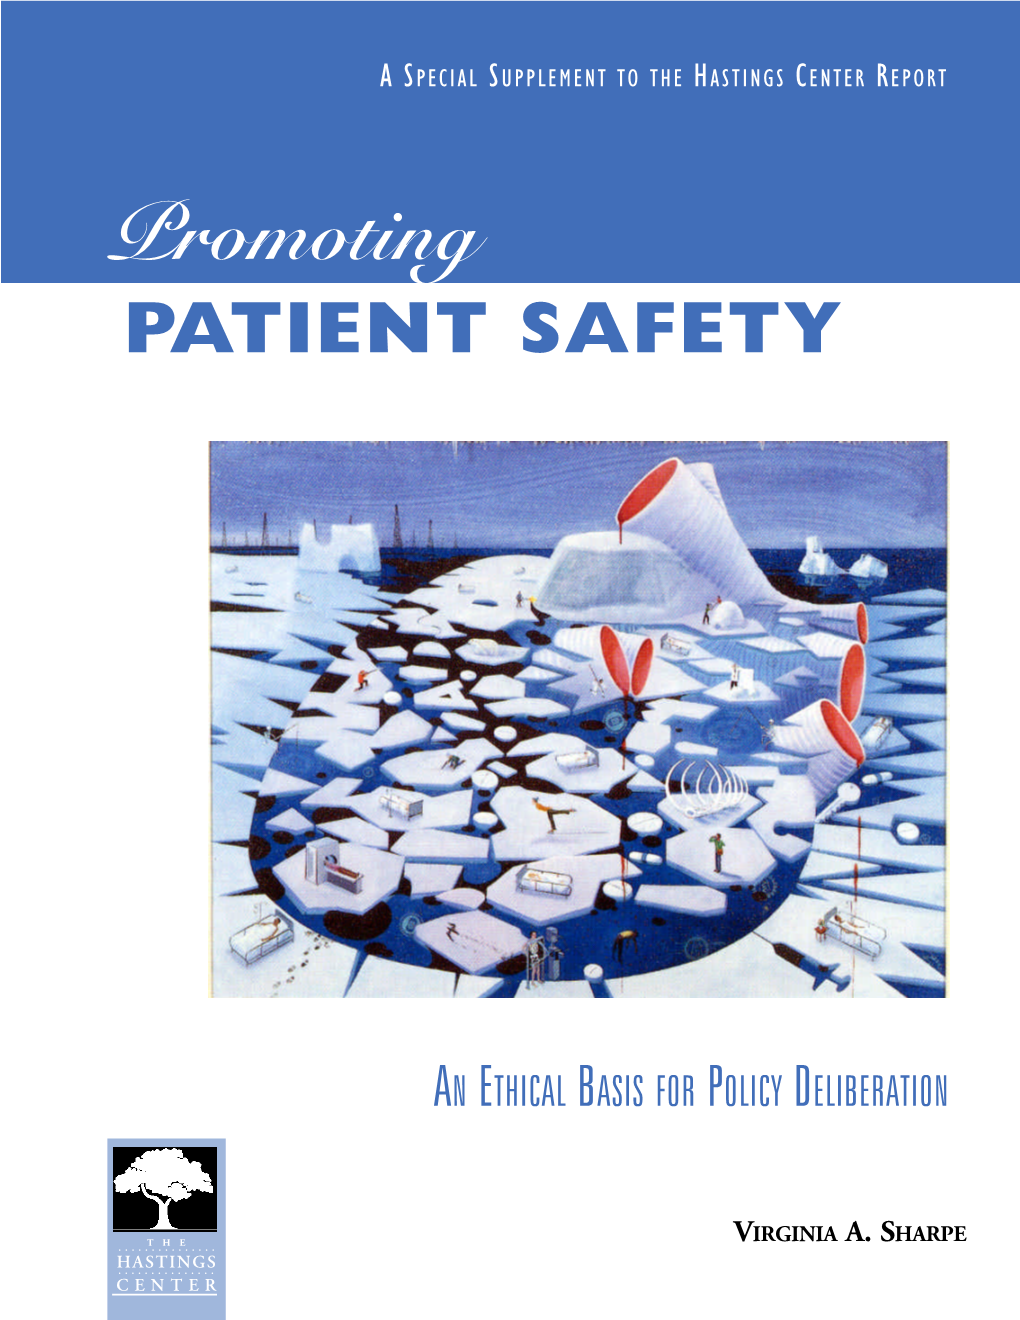 Promoting PATIENT SAFETY